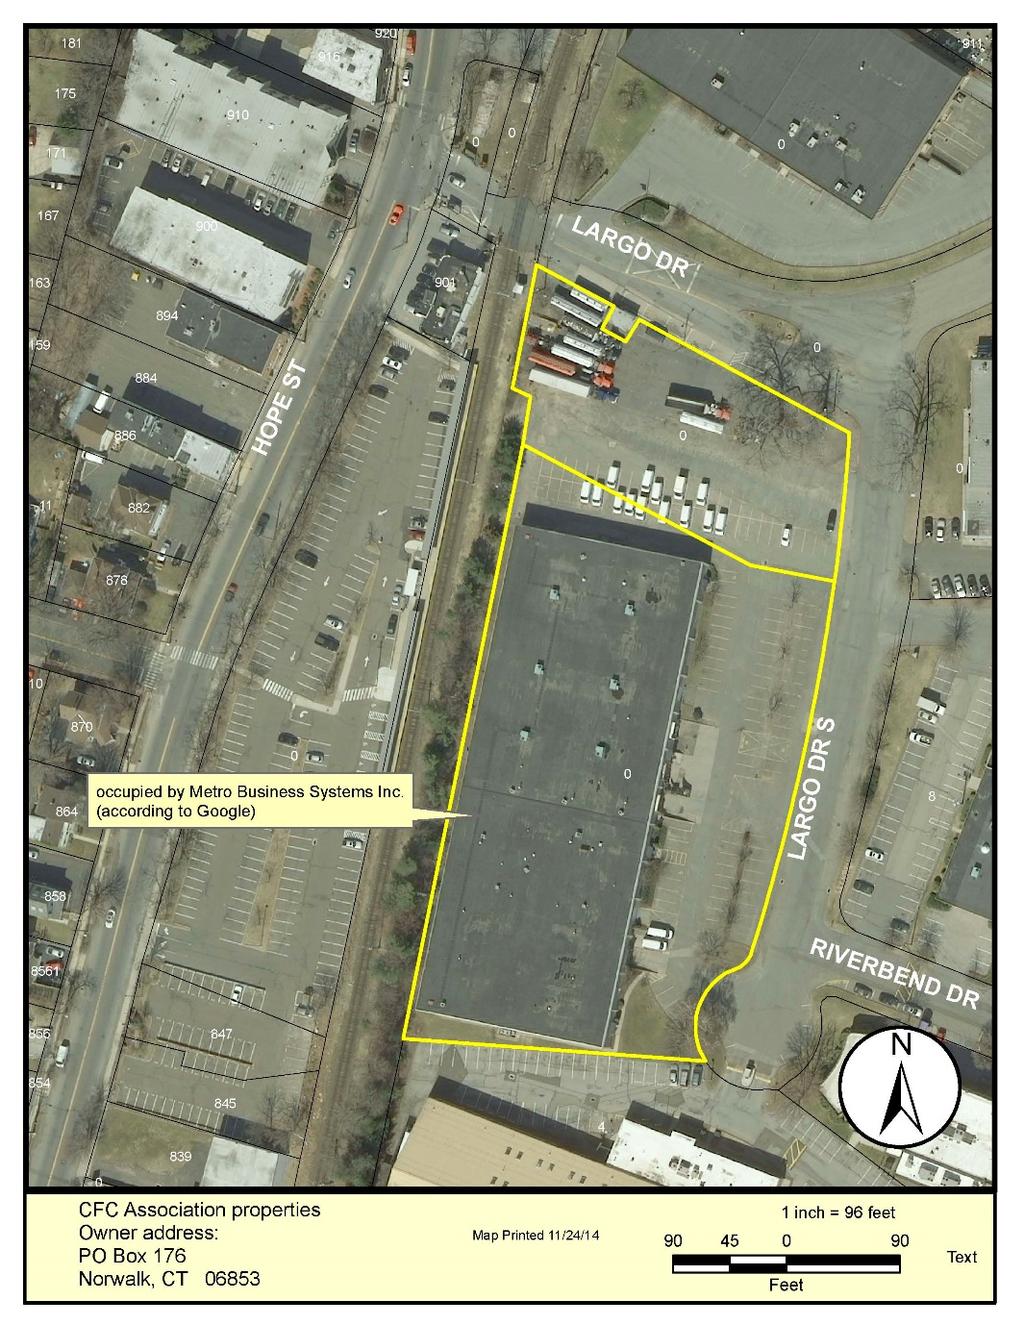 LARGO DRIVE PARCEL INFORMATION The parcel on Largo Drive offers a key opportunity to expand commuter parking at the Springdale station. An overview analysis shows the following: Parcel is.